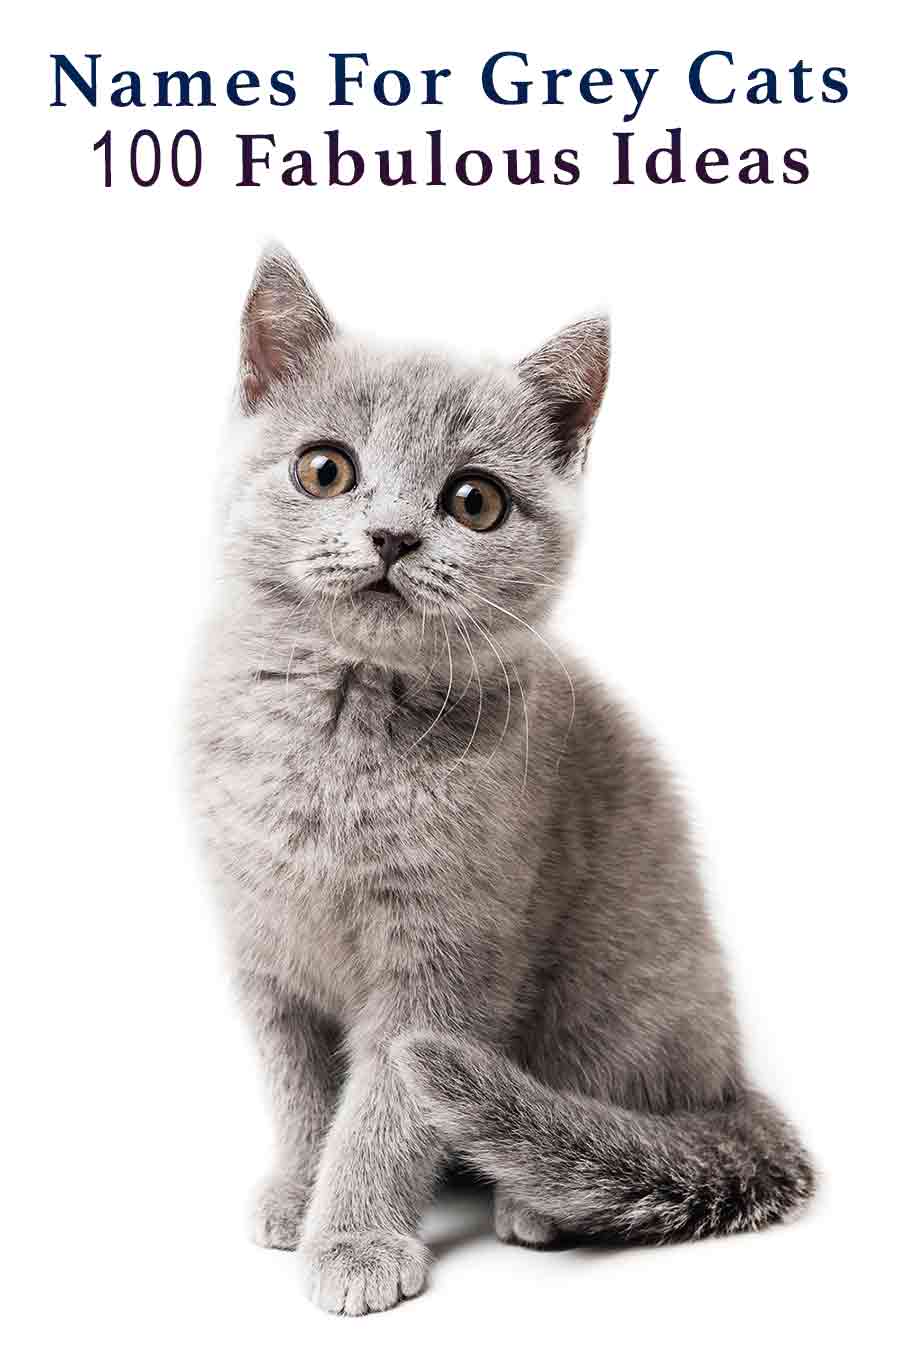 Grey Cat Names: 250 Great Names For Grey Kittens